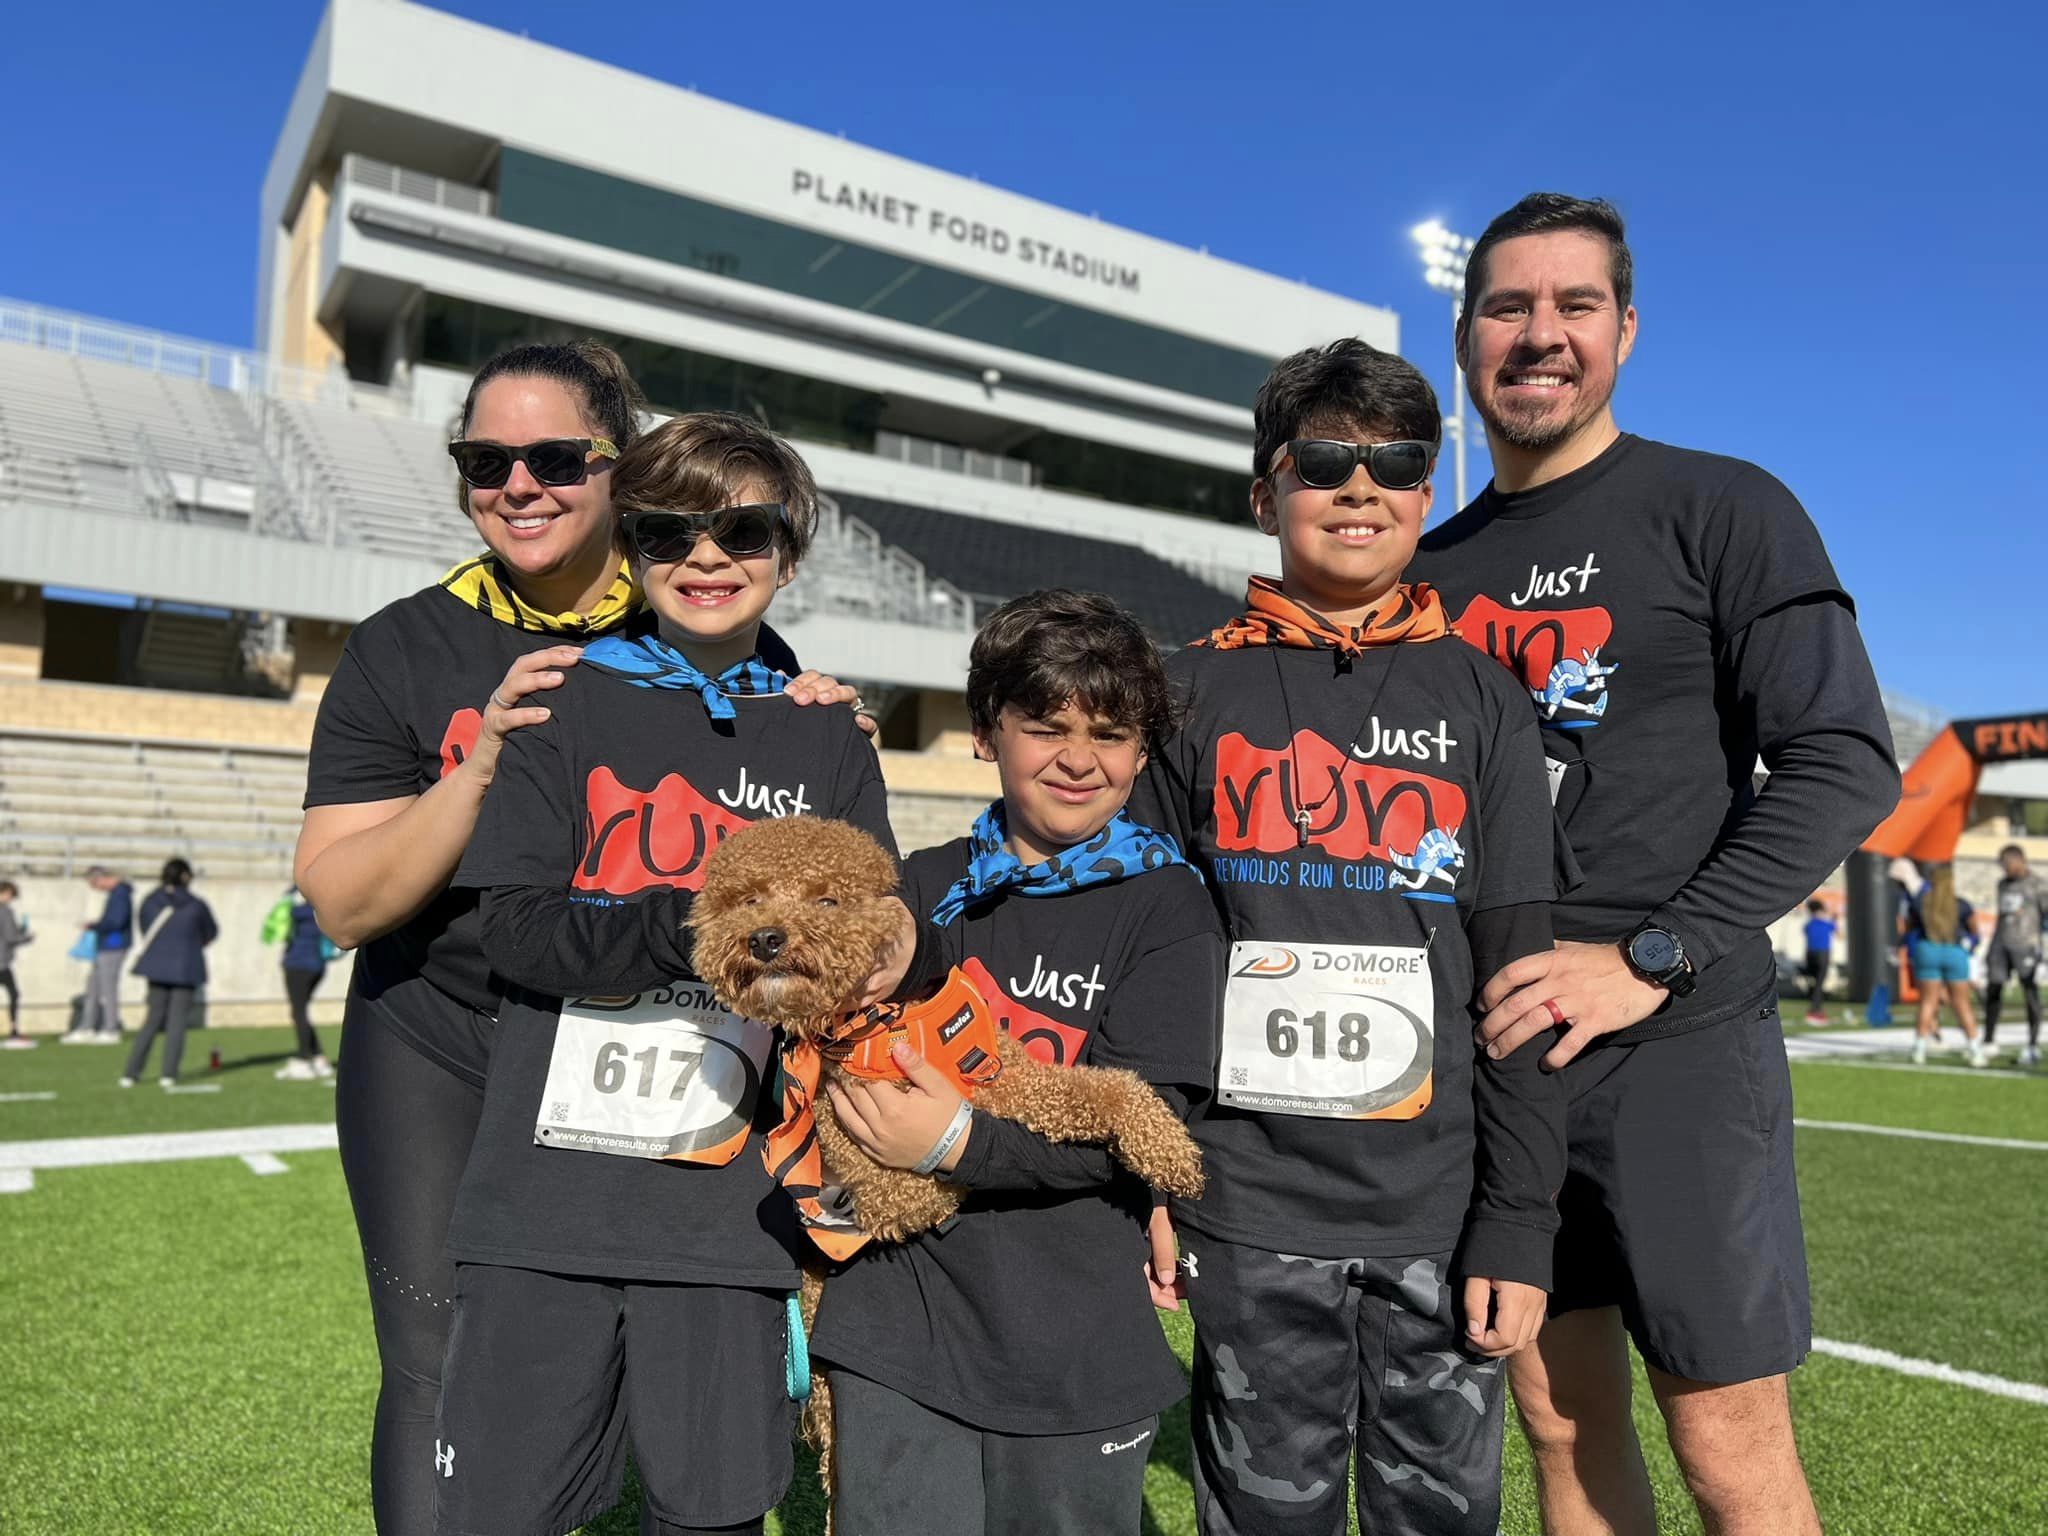 Registration Now Open for Spring ISD’s Annual Fun Run and Wellness Fair